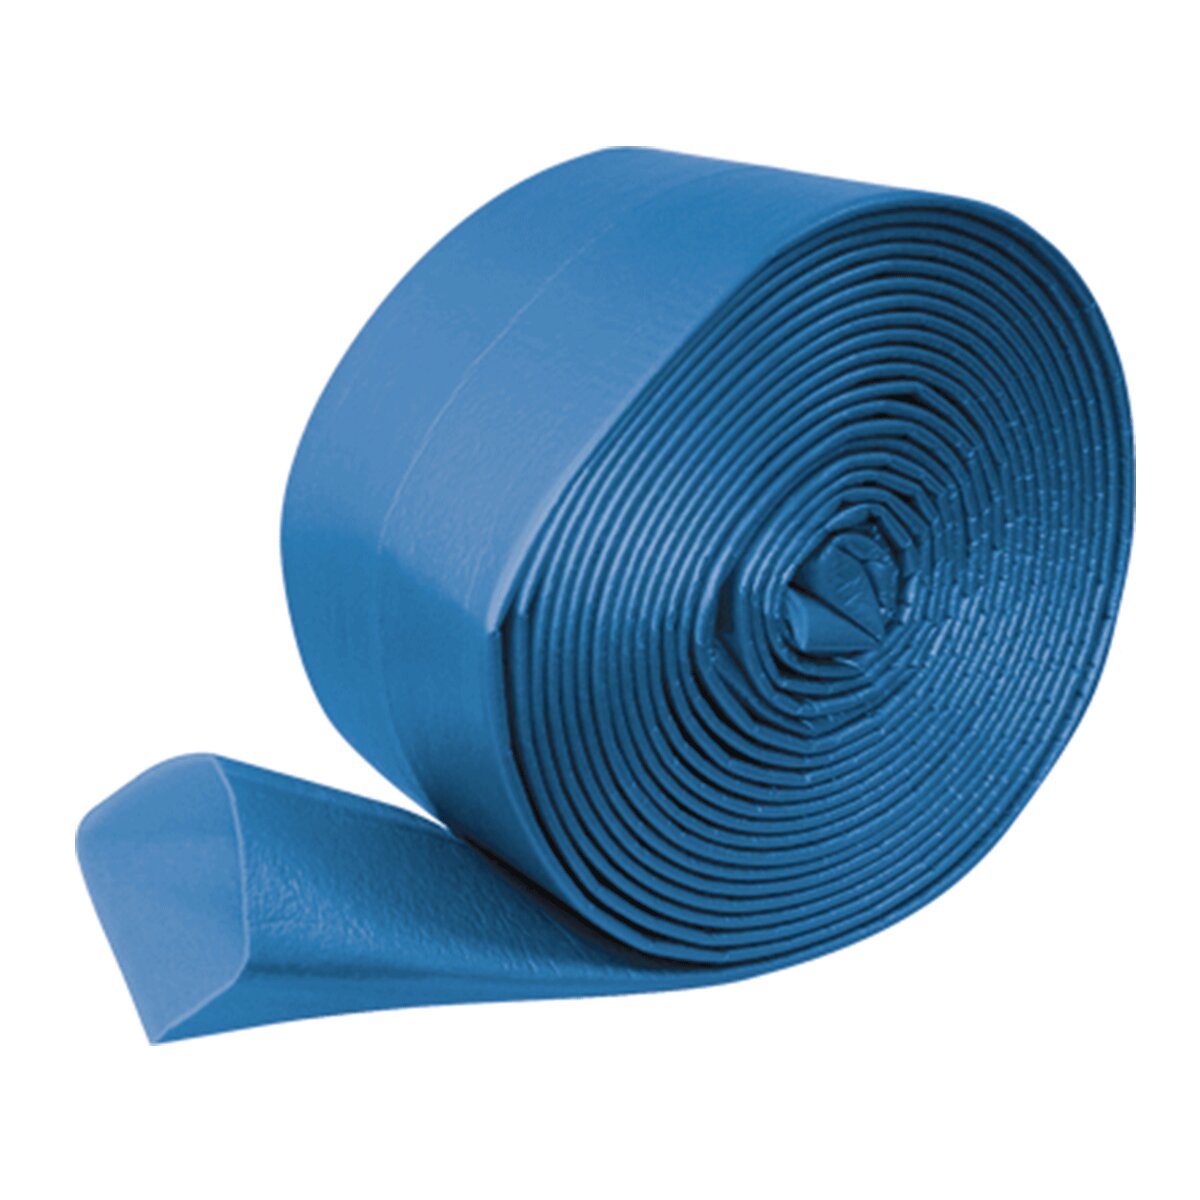 Valsir insulating coil for round corrugated pipe Ø 90